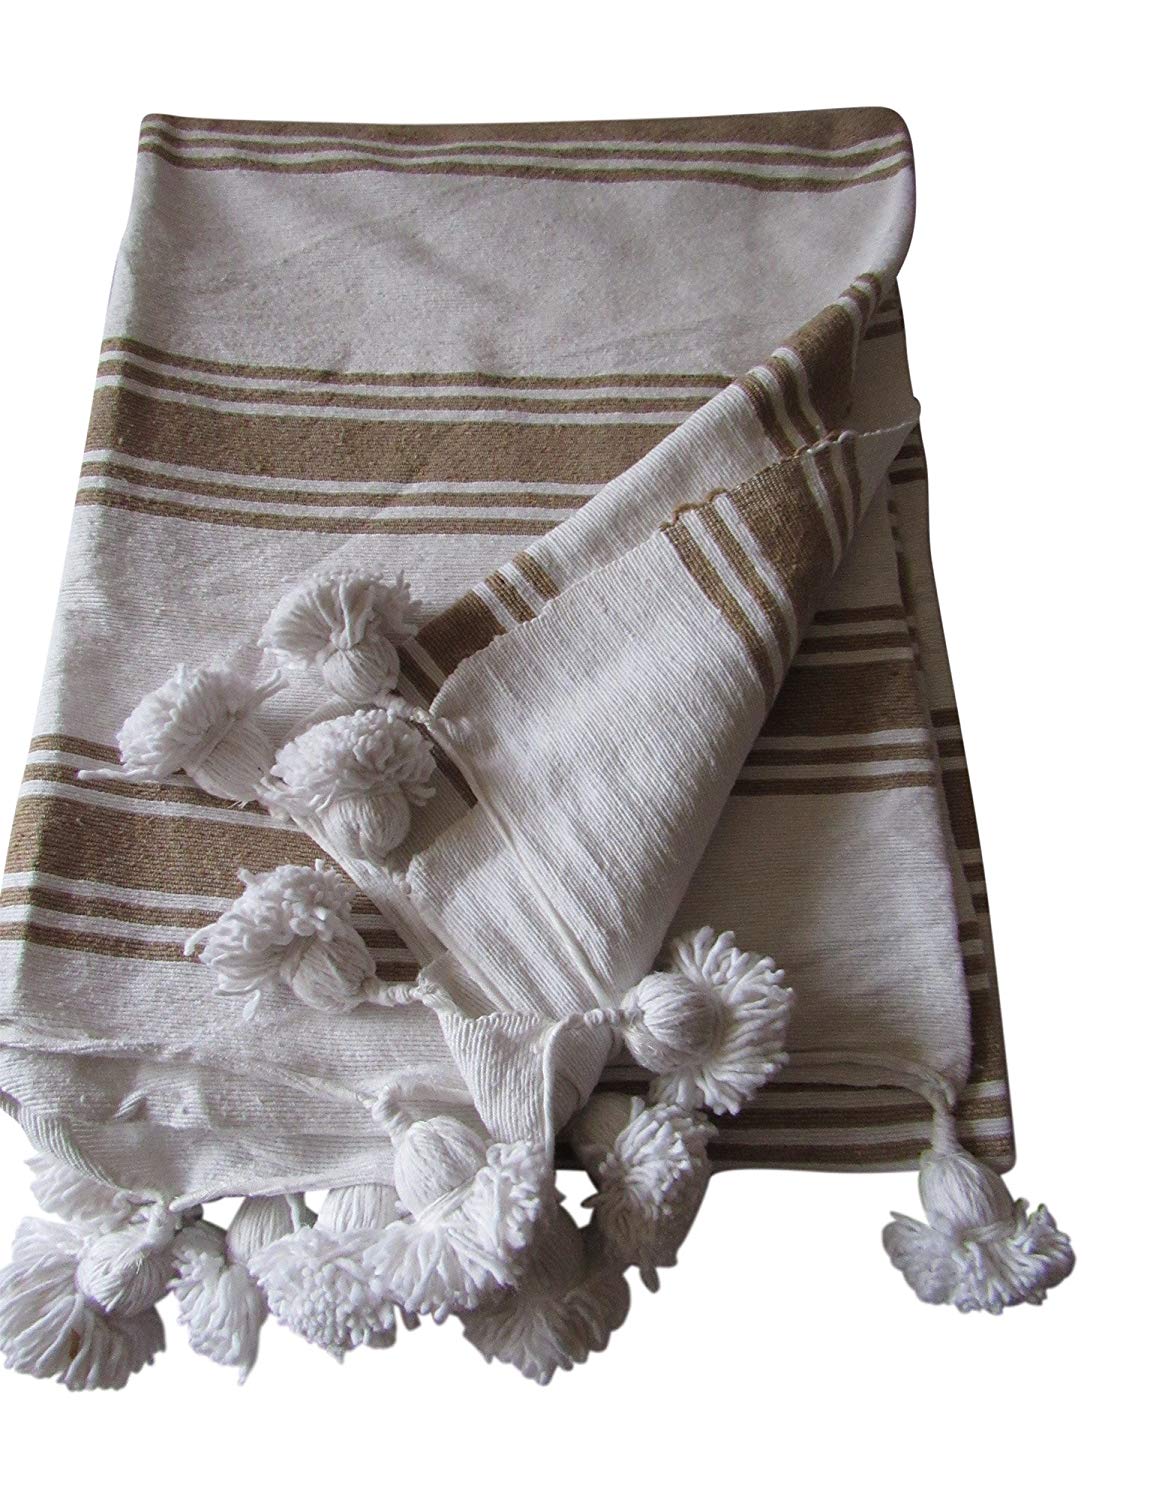 Handcraft Collection Handspun Moroccan Pom Pom Throw Blanket White with Grey Stripes, 100% Berber Wool, Handmade by Skilled Craftspeople, - Marrakesh Gardens